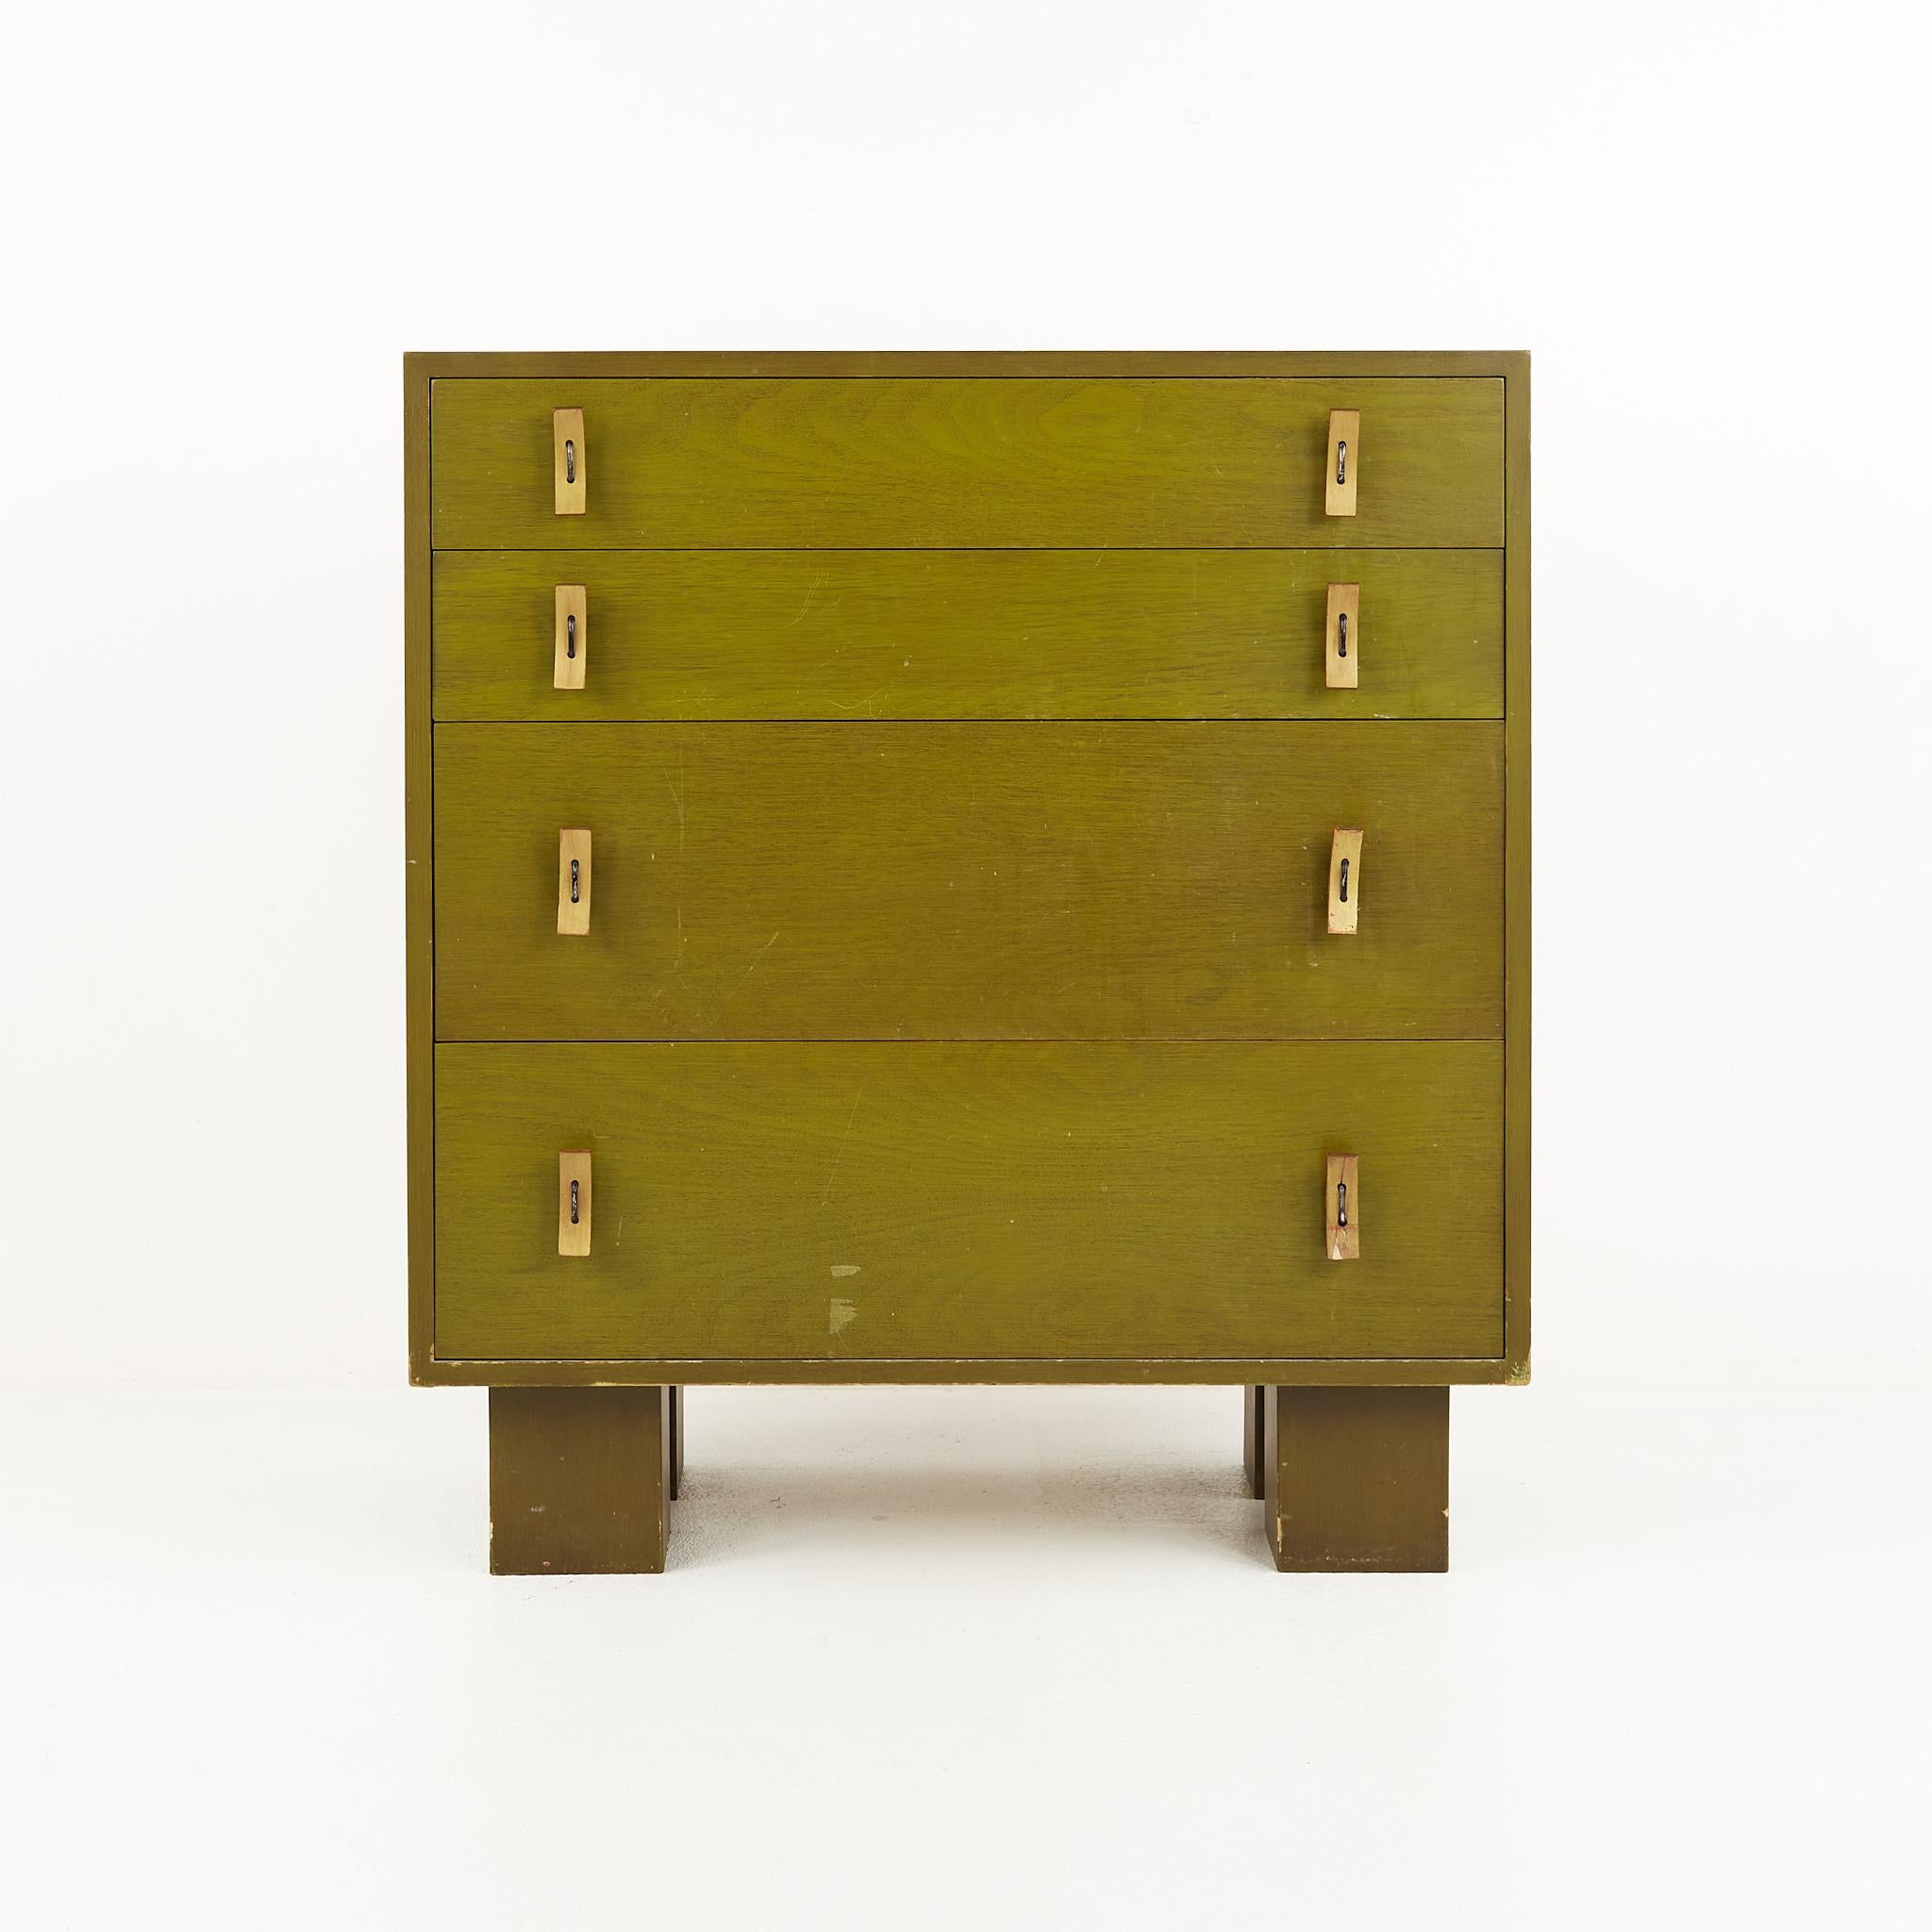 Stanley young for Glenn of California mid century green 4 drawer chest

The chest of drawers measures: 32.75 wide x 19 deep x 36.25 inches high

All pieces of furniture can be had in what we call restored vintage condition. That means the piece